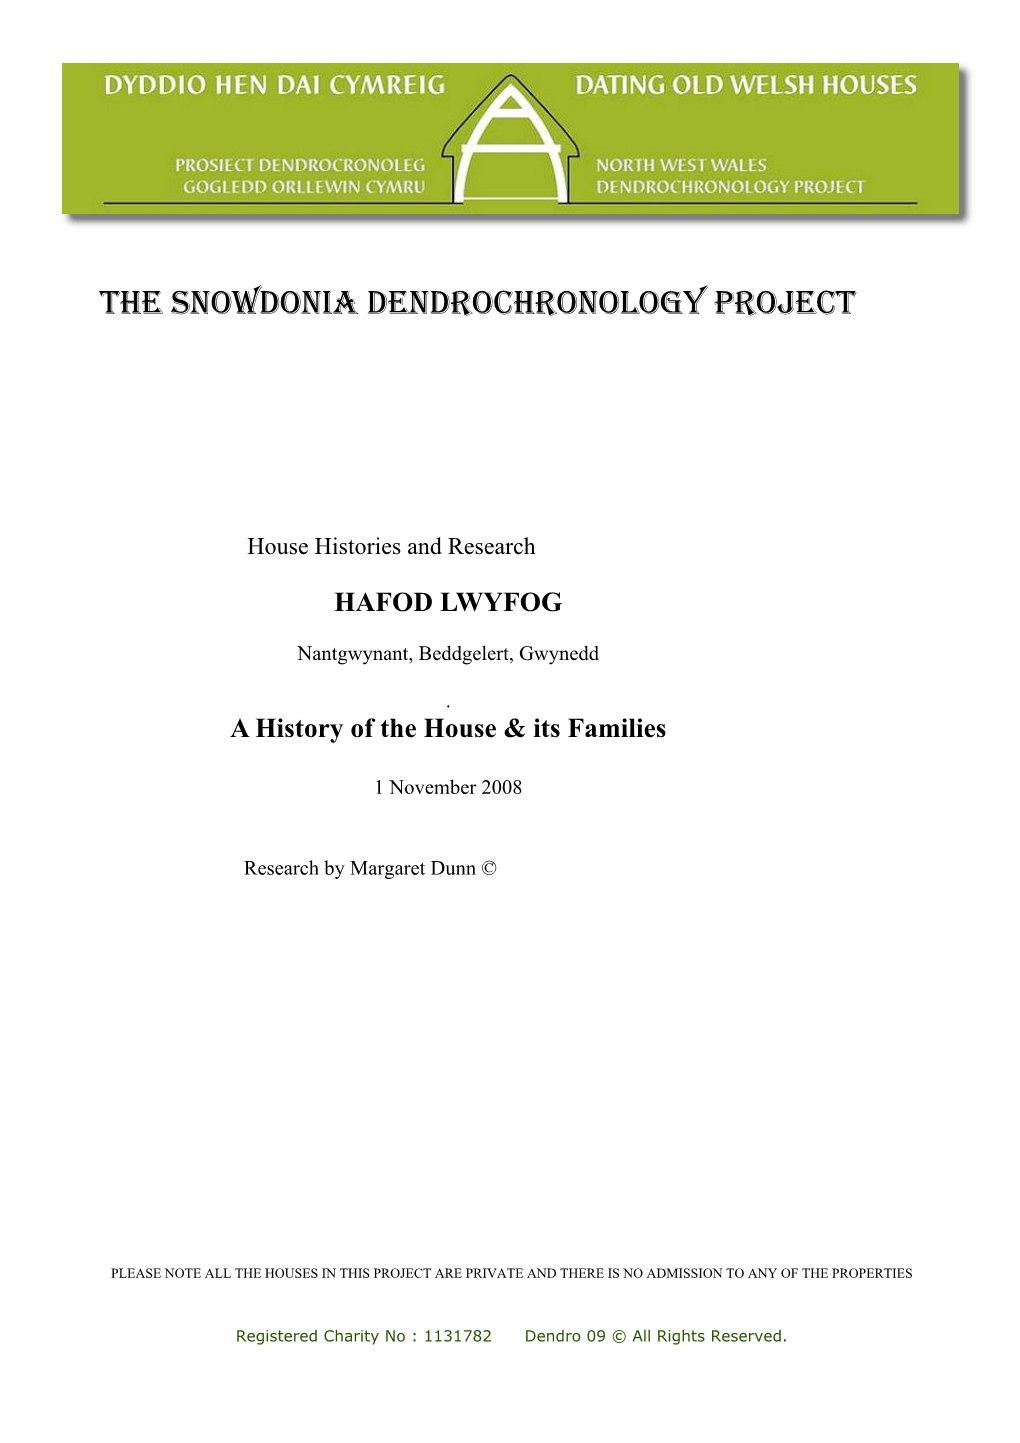 The Snowdonia Dendrochronology Project